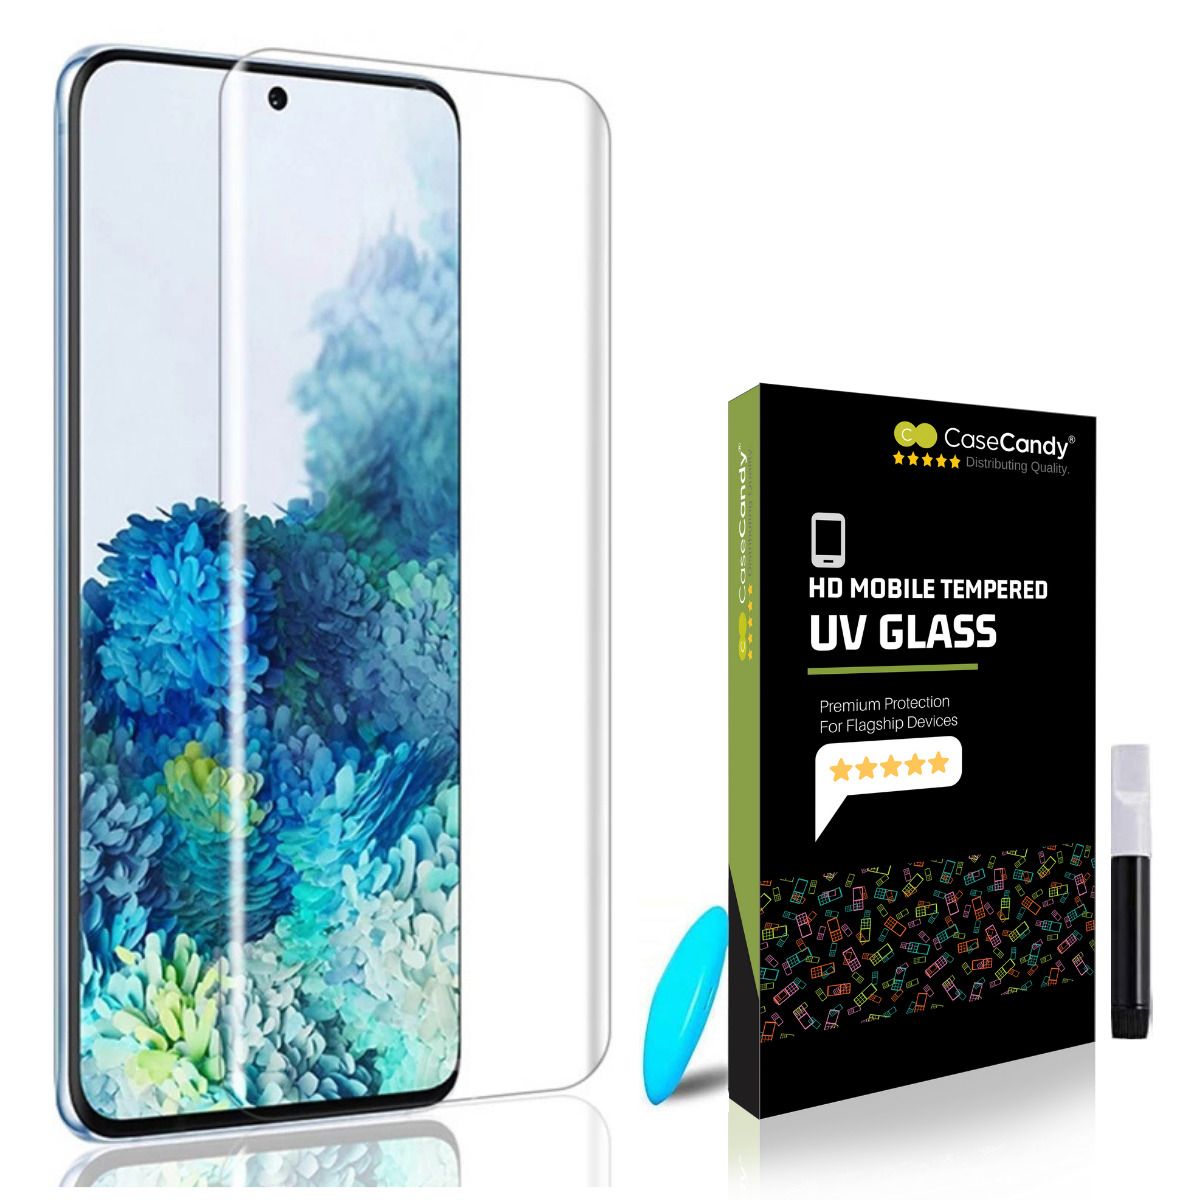 Bear Village 9H Hardness Bubble Free Tempered Glass Screen Protector Film for Samsung Galaxy S20 99.99% Clarity Screen Protector for Galaxy S20 2 Pack 